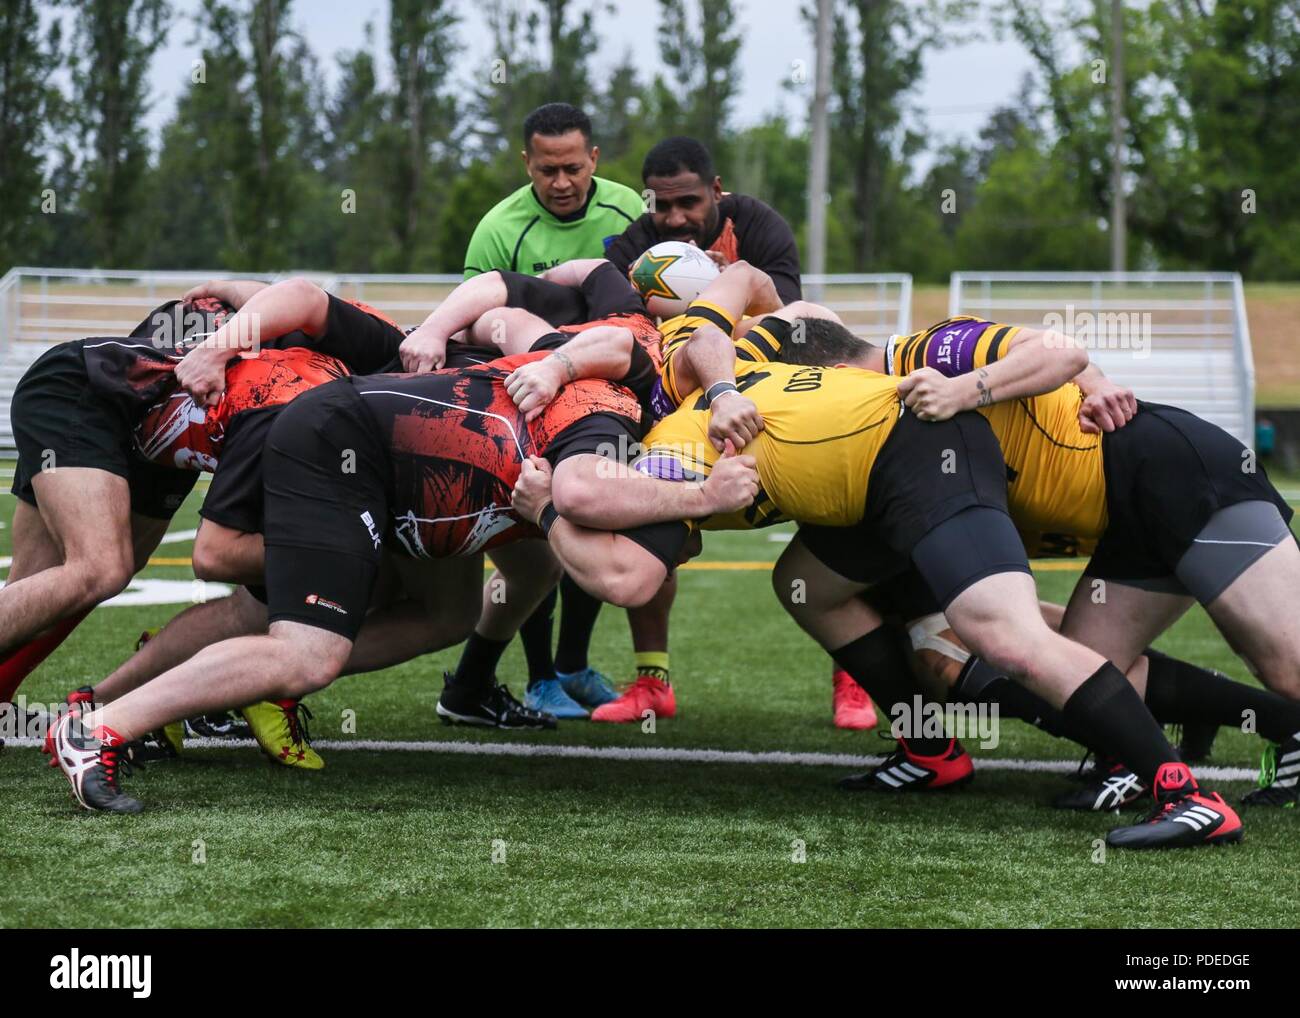 Soldiers from the Joint Base Lewis-McChord Army rugby team and seamen from the Bremerton Navy rugby team, collide with one another as they scrimmage to fight for the ball in the 20th